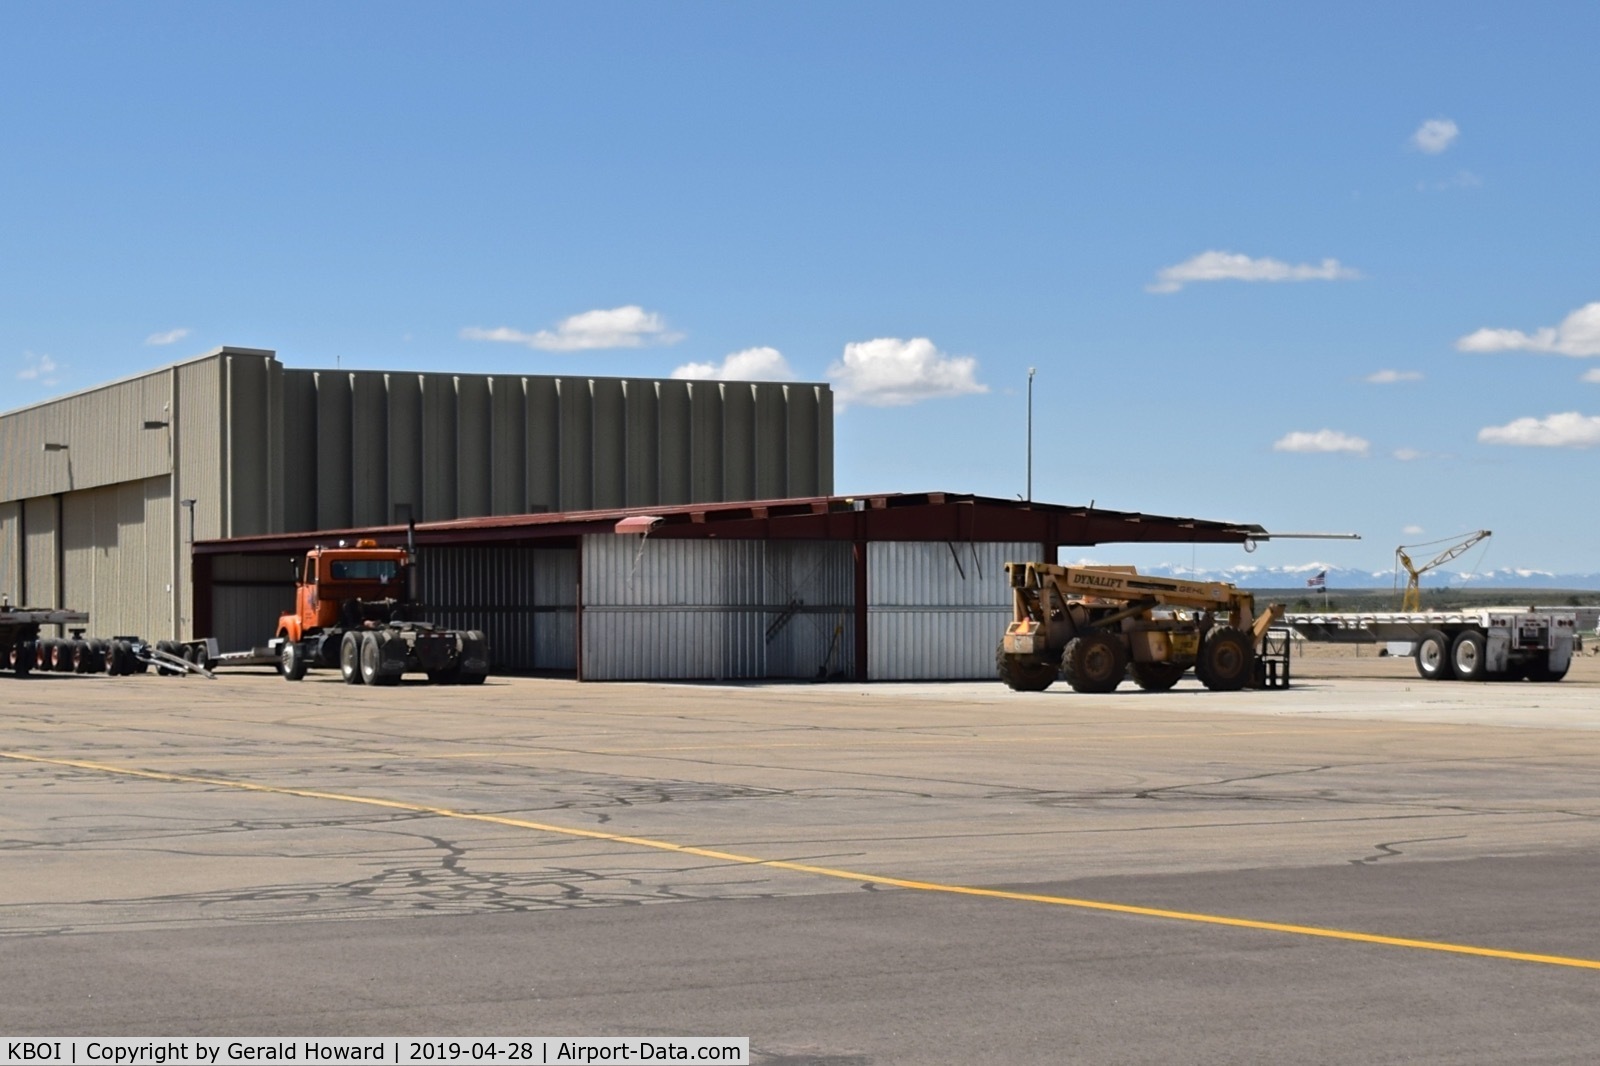 Boise Air Terminal/gowen Fld Airport (BOI) - One half of hangars left at original location during move.